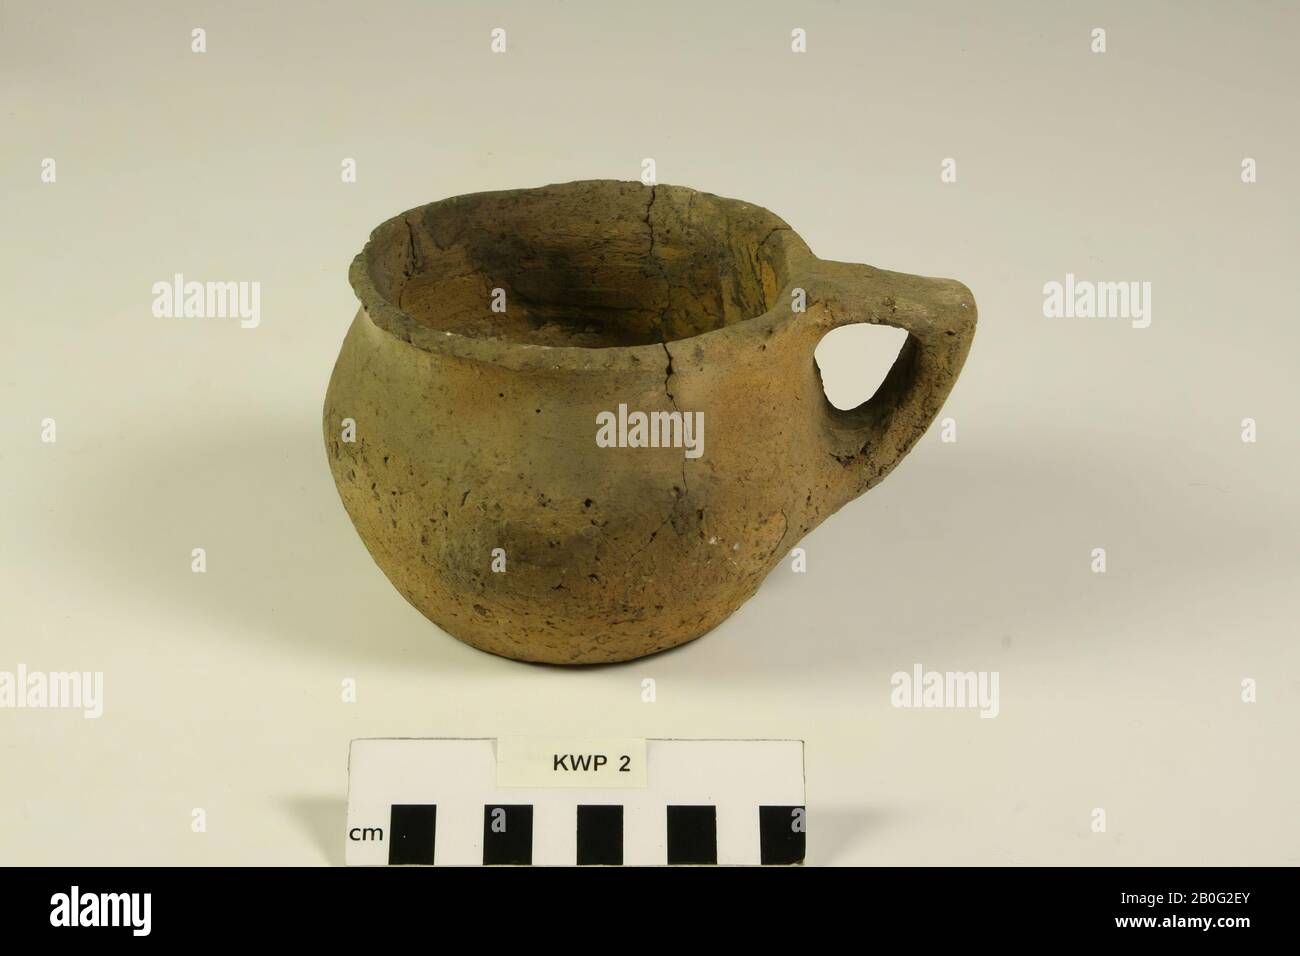 Cup with 1 ear. From the neck 4 vertical cracks run down., Cup, pottery, h: 9.5 cm, diam: 16.4 cm, prehistory, Germany Stock Photo